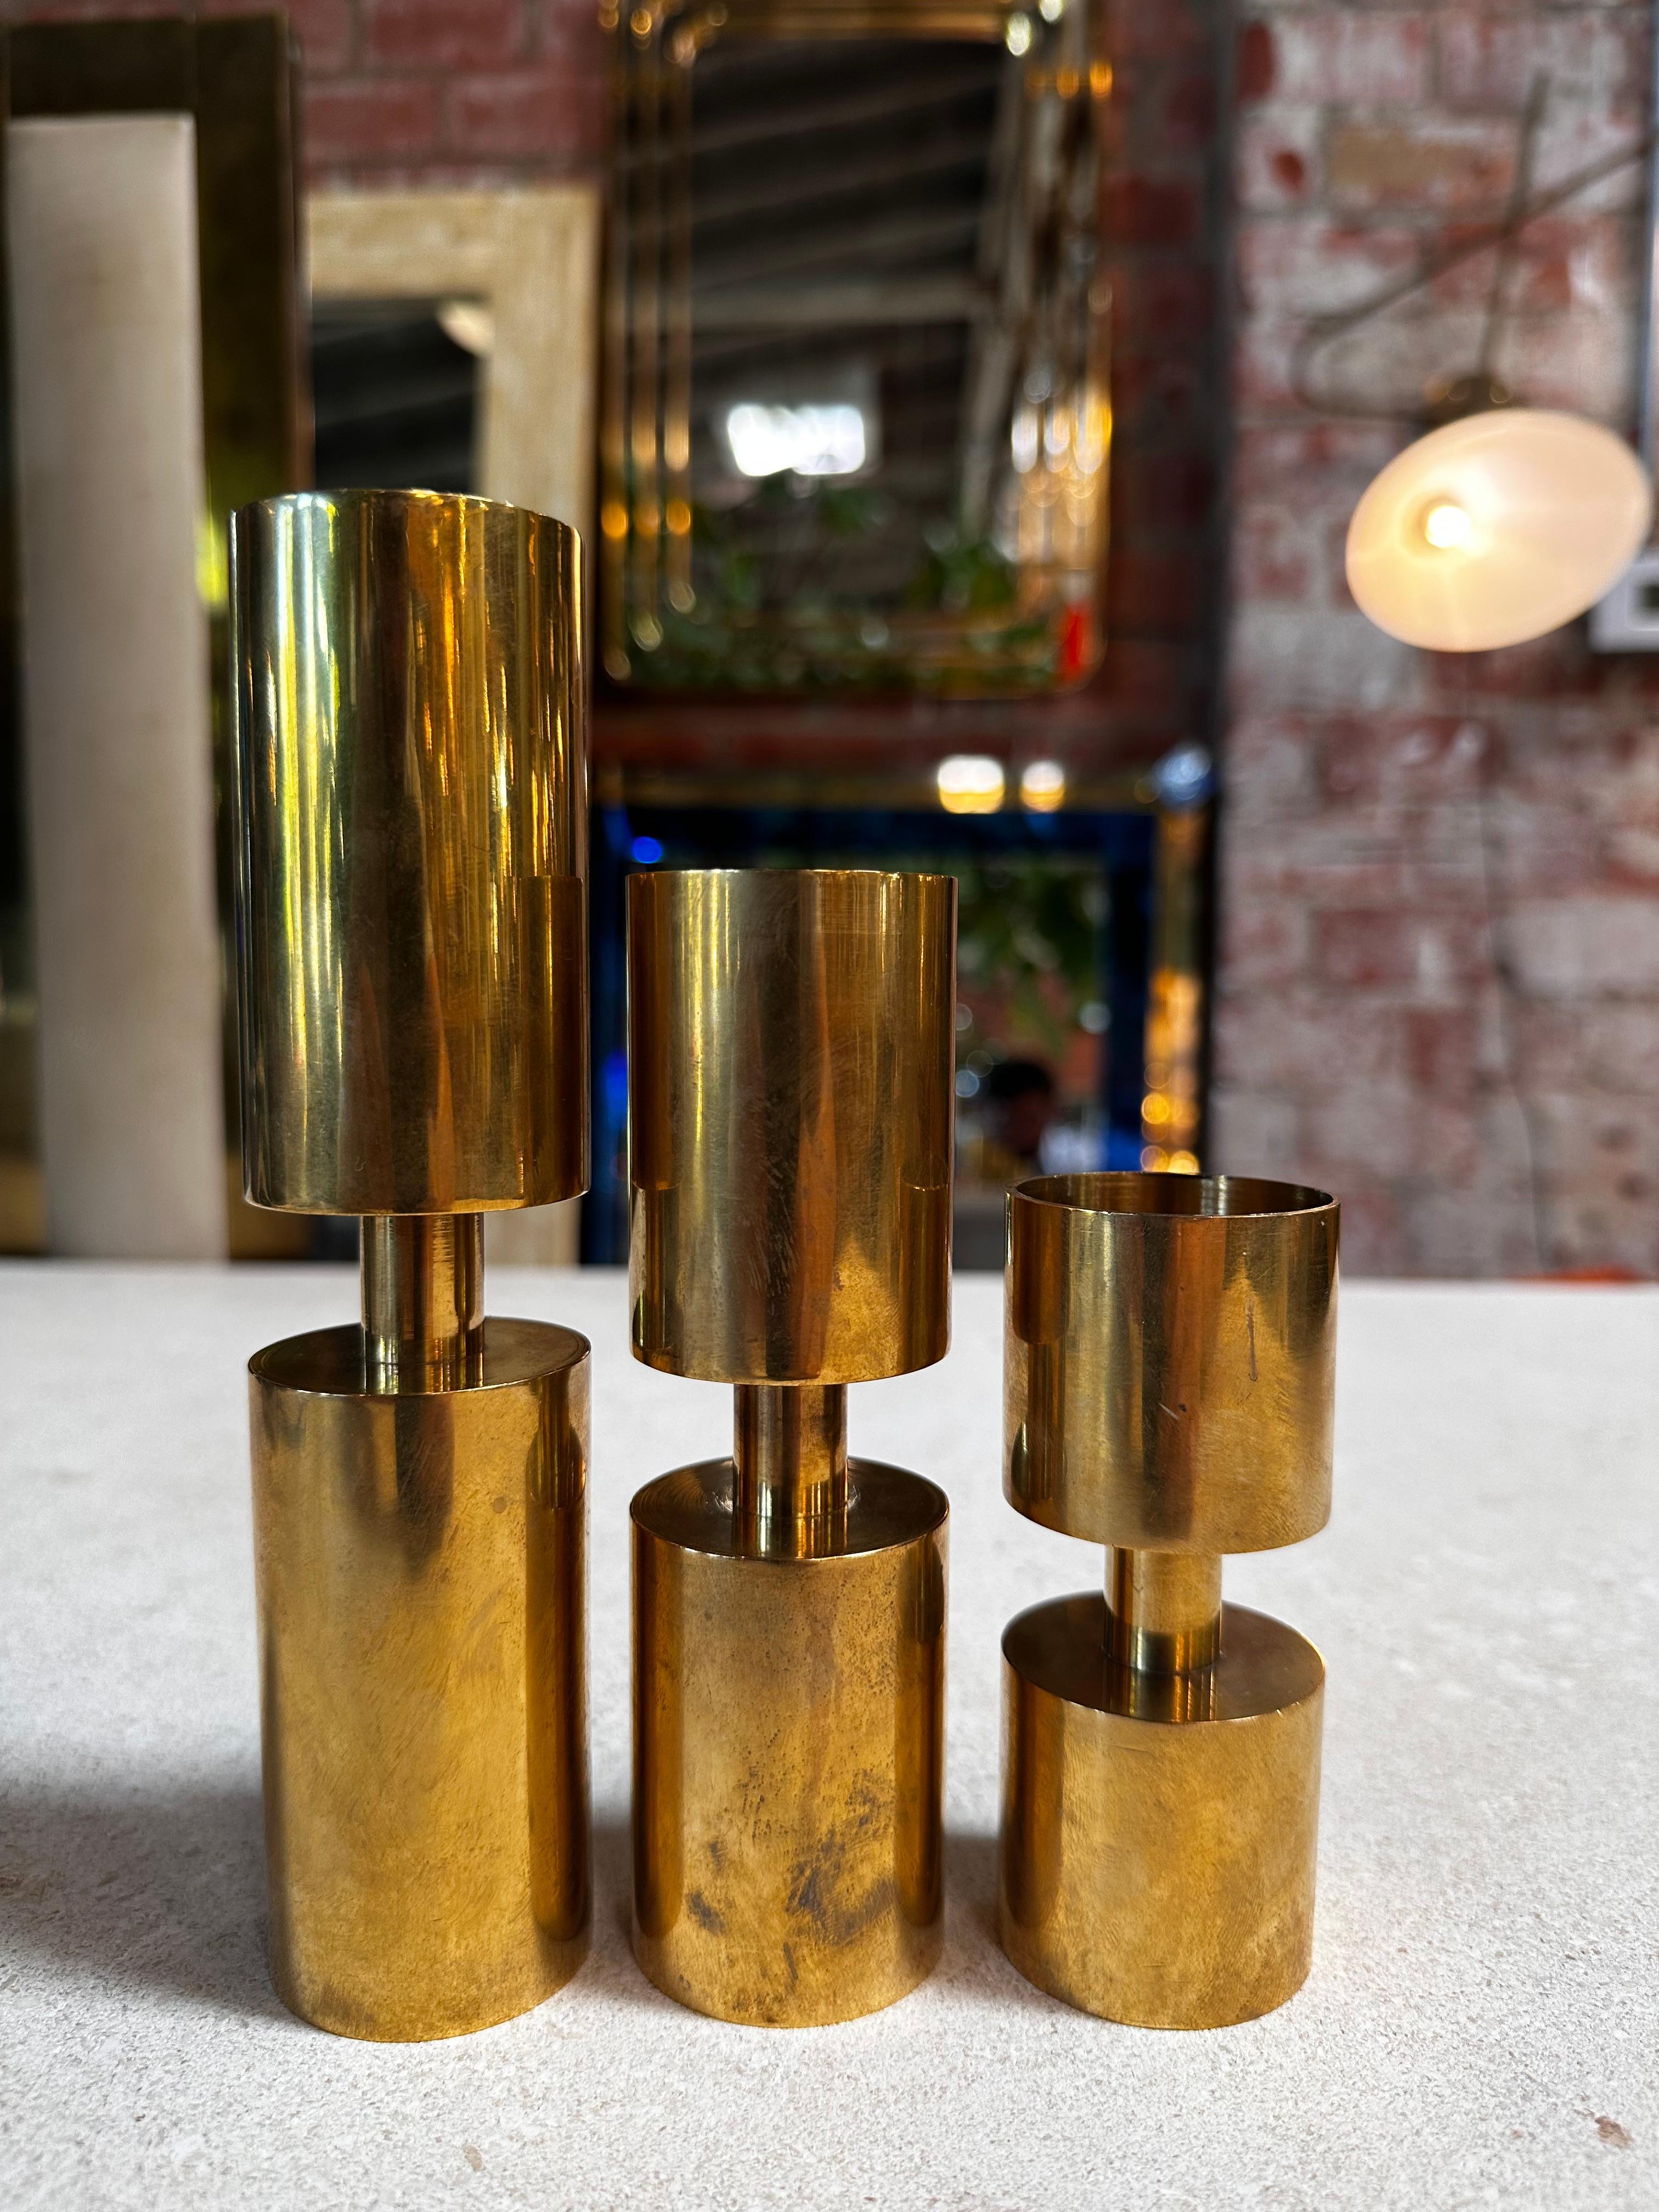 Crafted in the 1970s, this set of three brass candle holders designed by Thelma Zoéga for Zoégas Kaffe is a fusion of artistry and functionality. Reflecting Scandinavian design sensibilities, these pieces capture the essence of the era with their